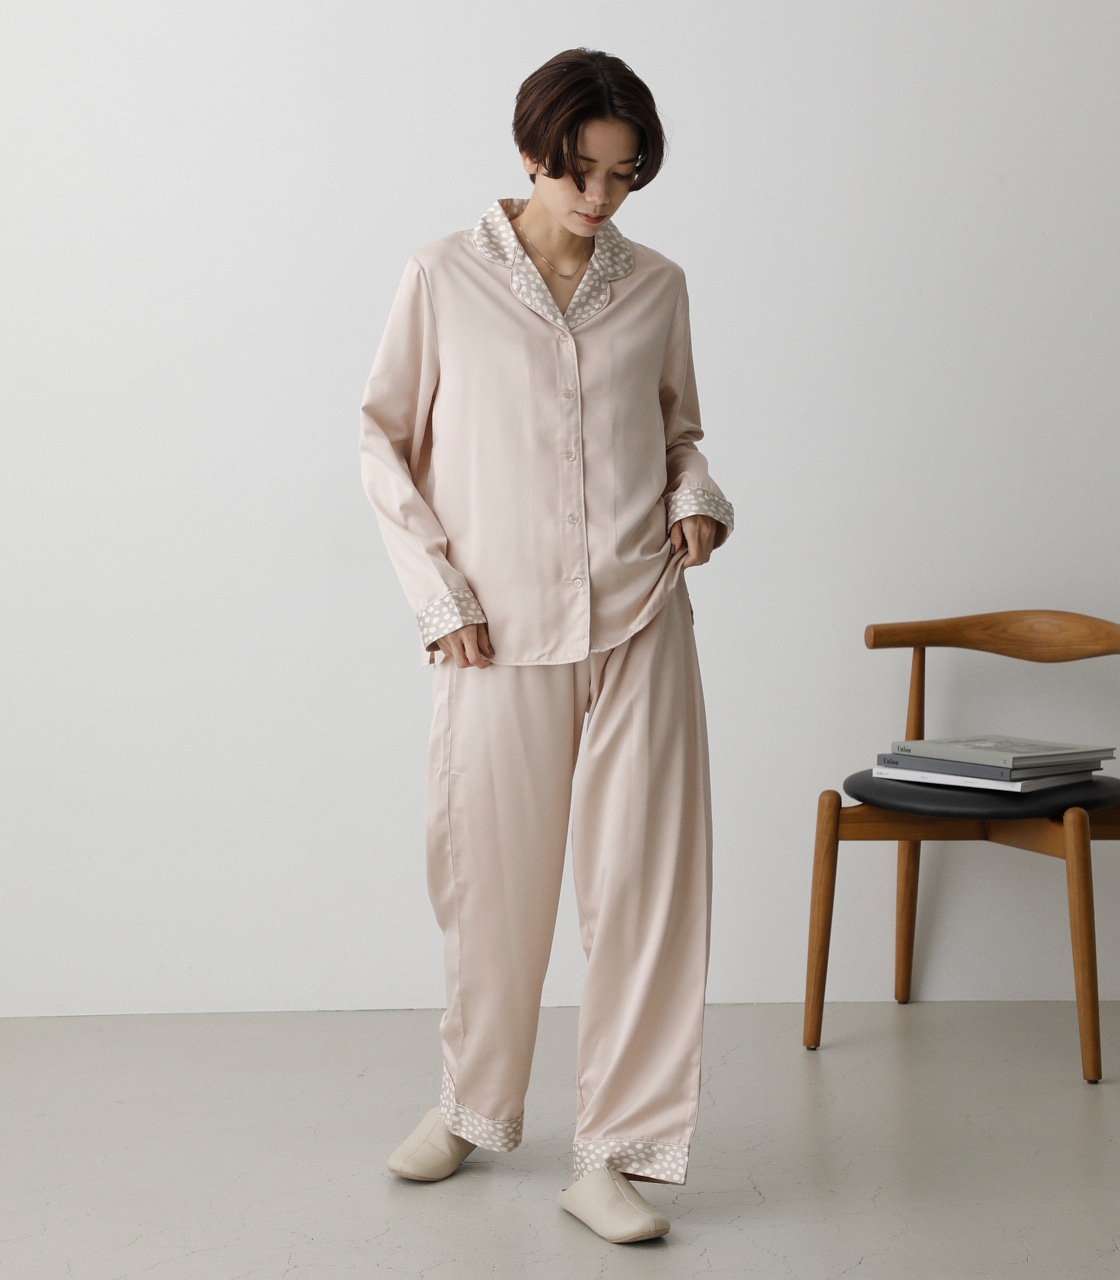 T/H SATIN PIPING PAJAMAS/T/Hサテンパイピングパジャマ 詳細画像 L/BEG 2